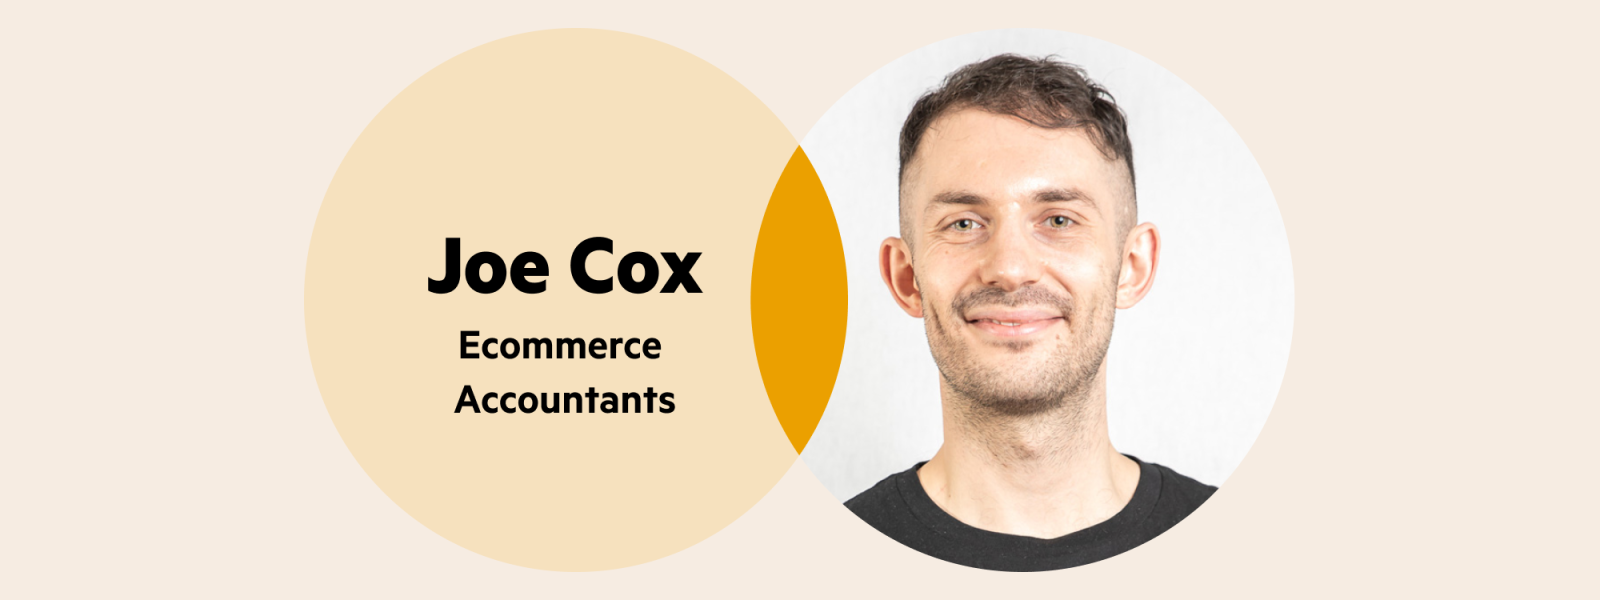 A Venn diagram: the left circle is pale yellow with the words 'Joe Cox Ecommerce Accountants', and the right circle is Joe's headshot. He has short hair, stubble and is wearing a black tshirt. The circle crossover section is bright yellow/ orange.